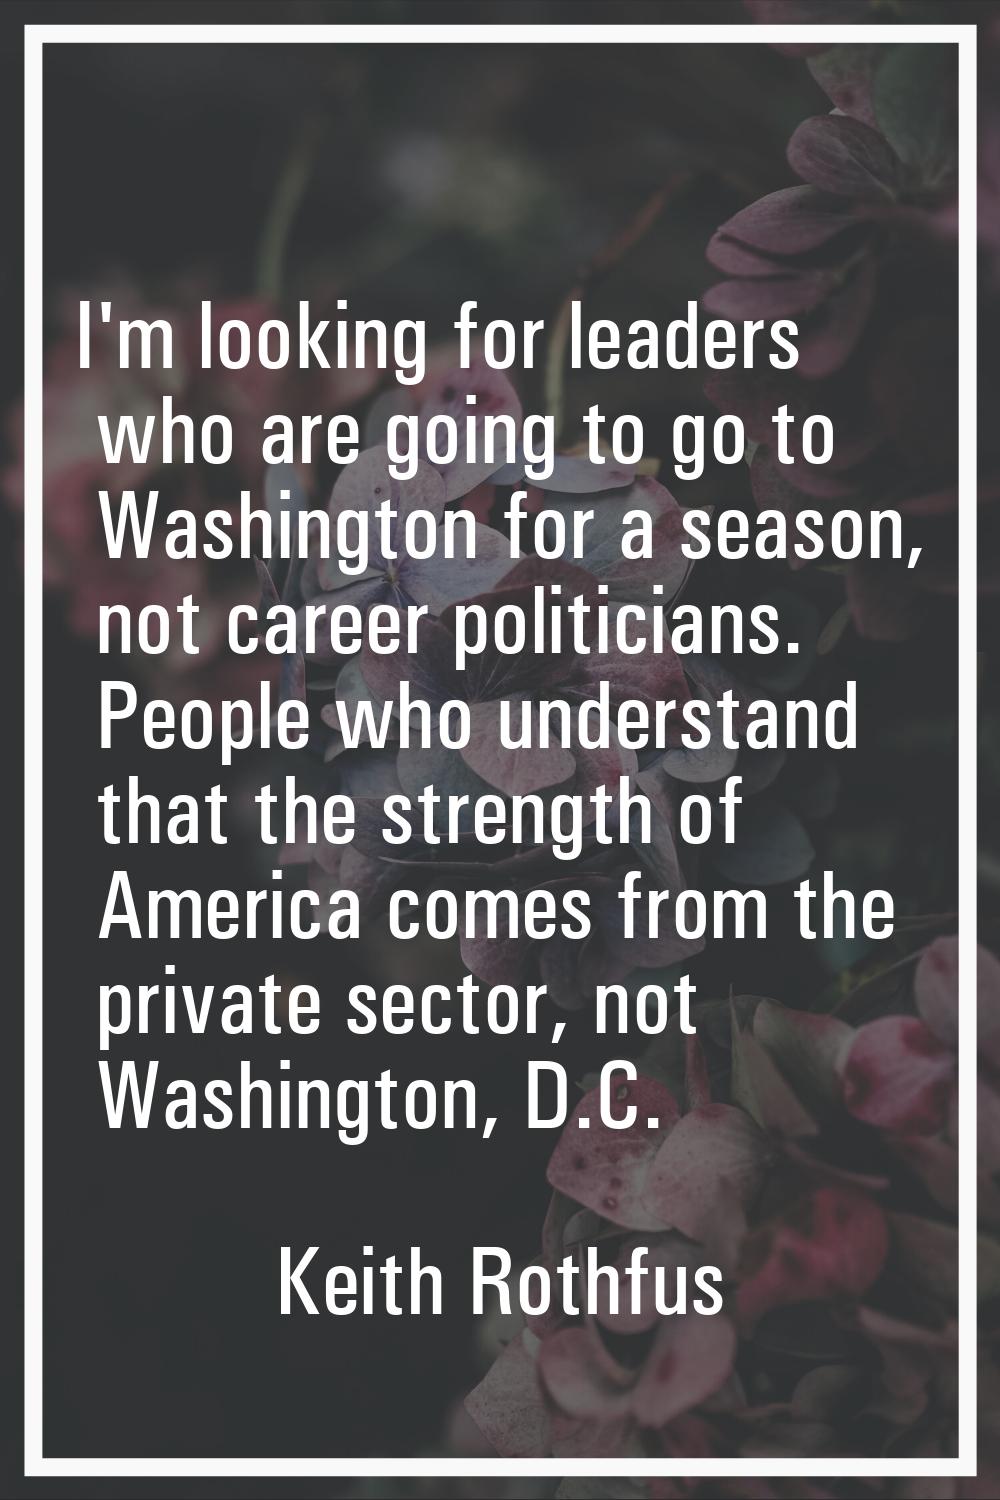 I'm looking for leaders who are going to go to Washington for a season, not career politicians. Peo